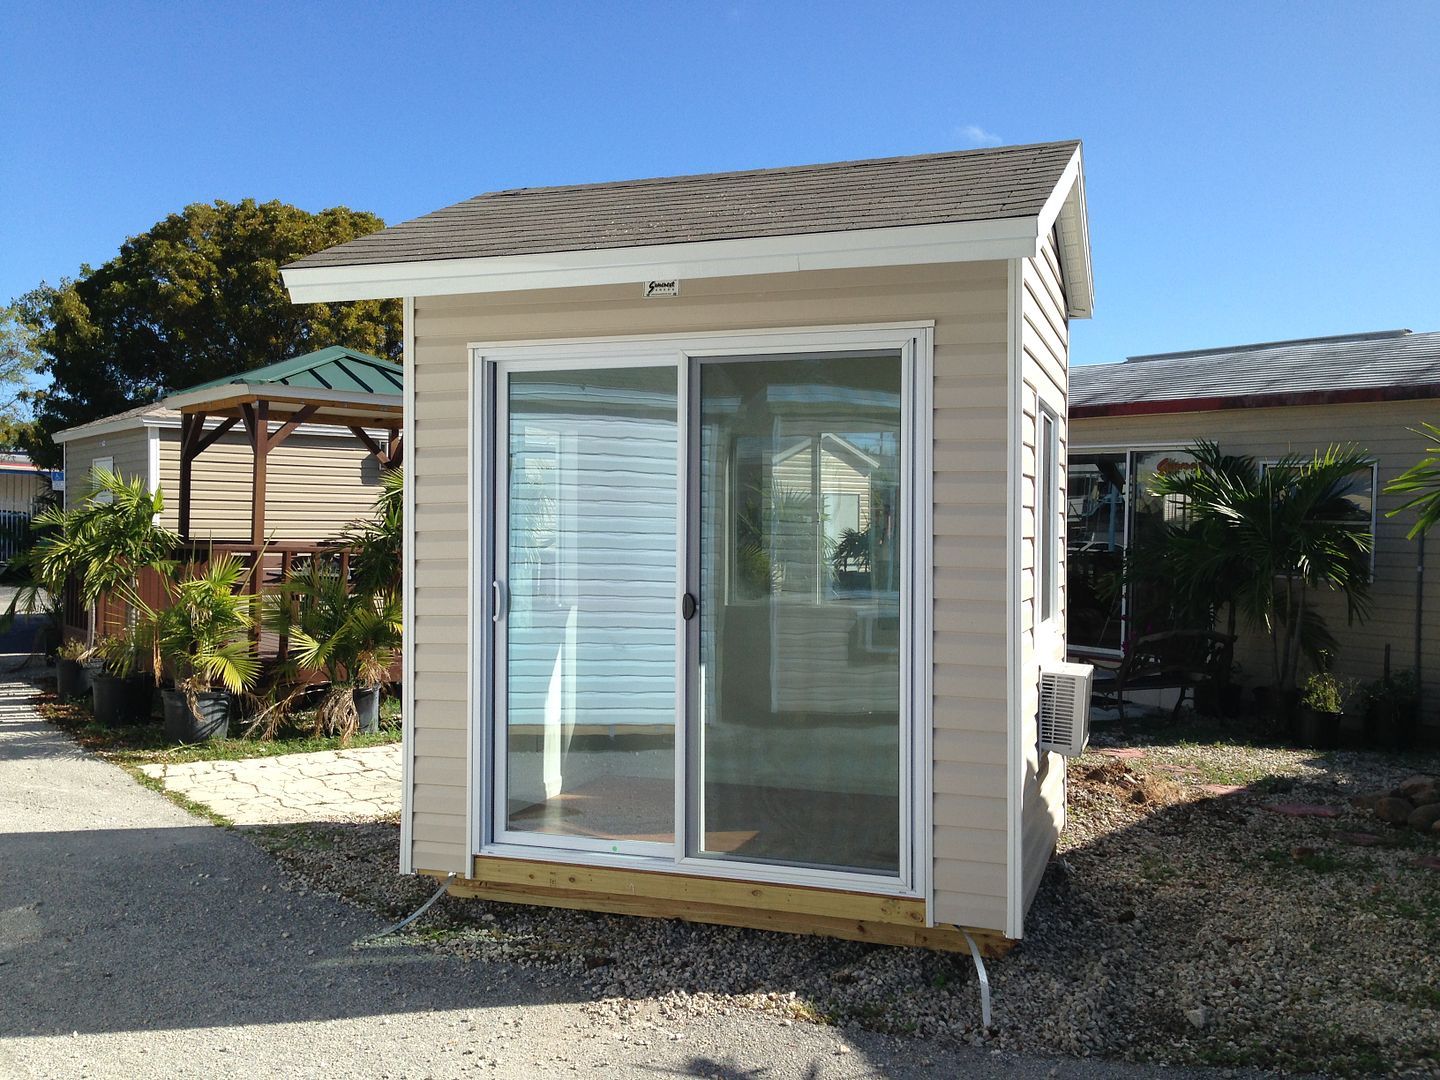 SALE on SHEDS in MIAMI - Guard house for sale